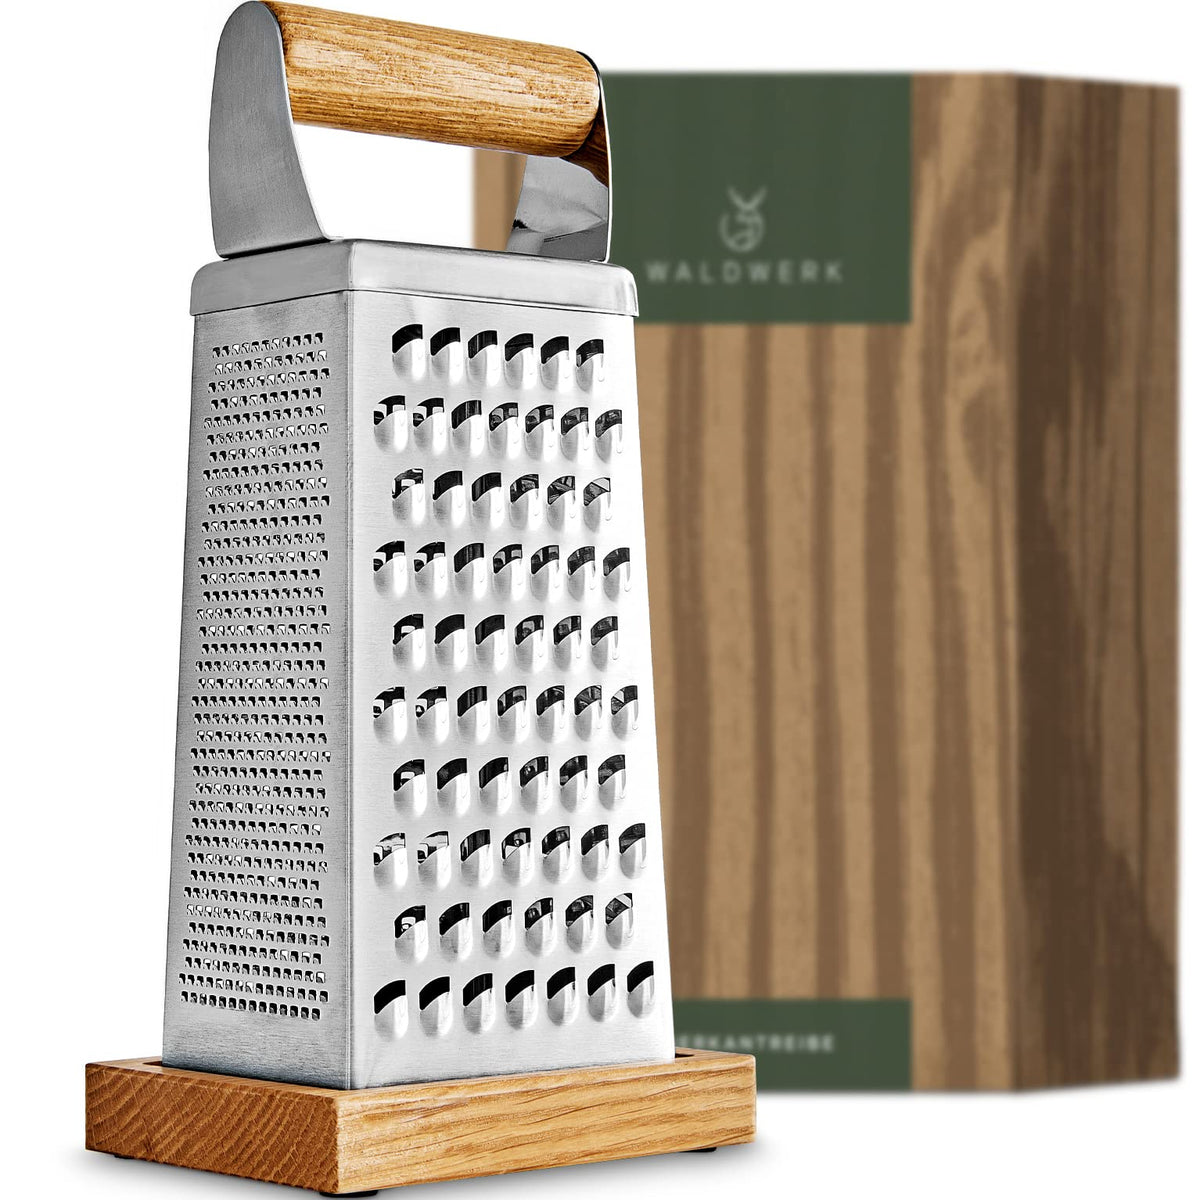 TUPMFG Box Grater, Stainless Steel Kitchen Cheese Grater with 4 Sides for  Parmesan Cheese, Vegetables, Ginger Handheld Food Shredder Silver